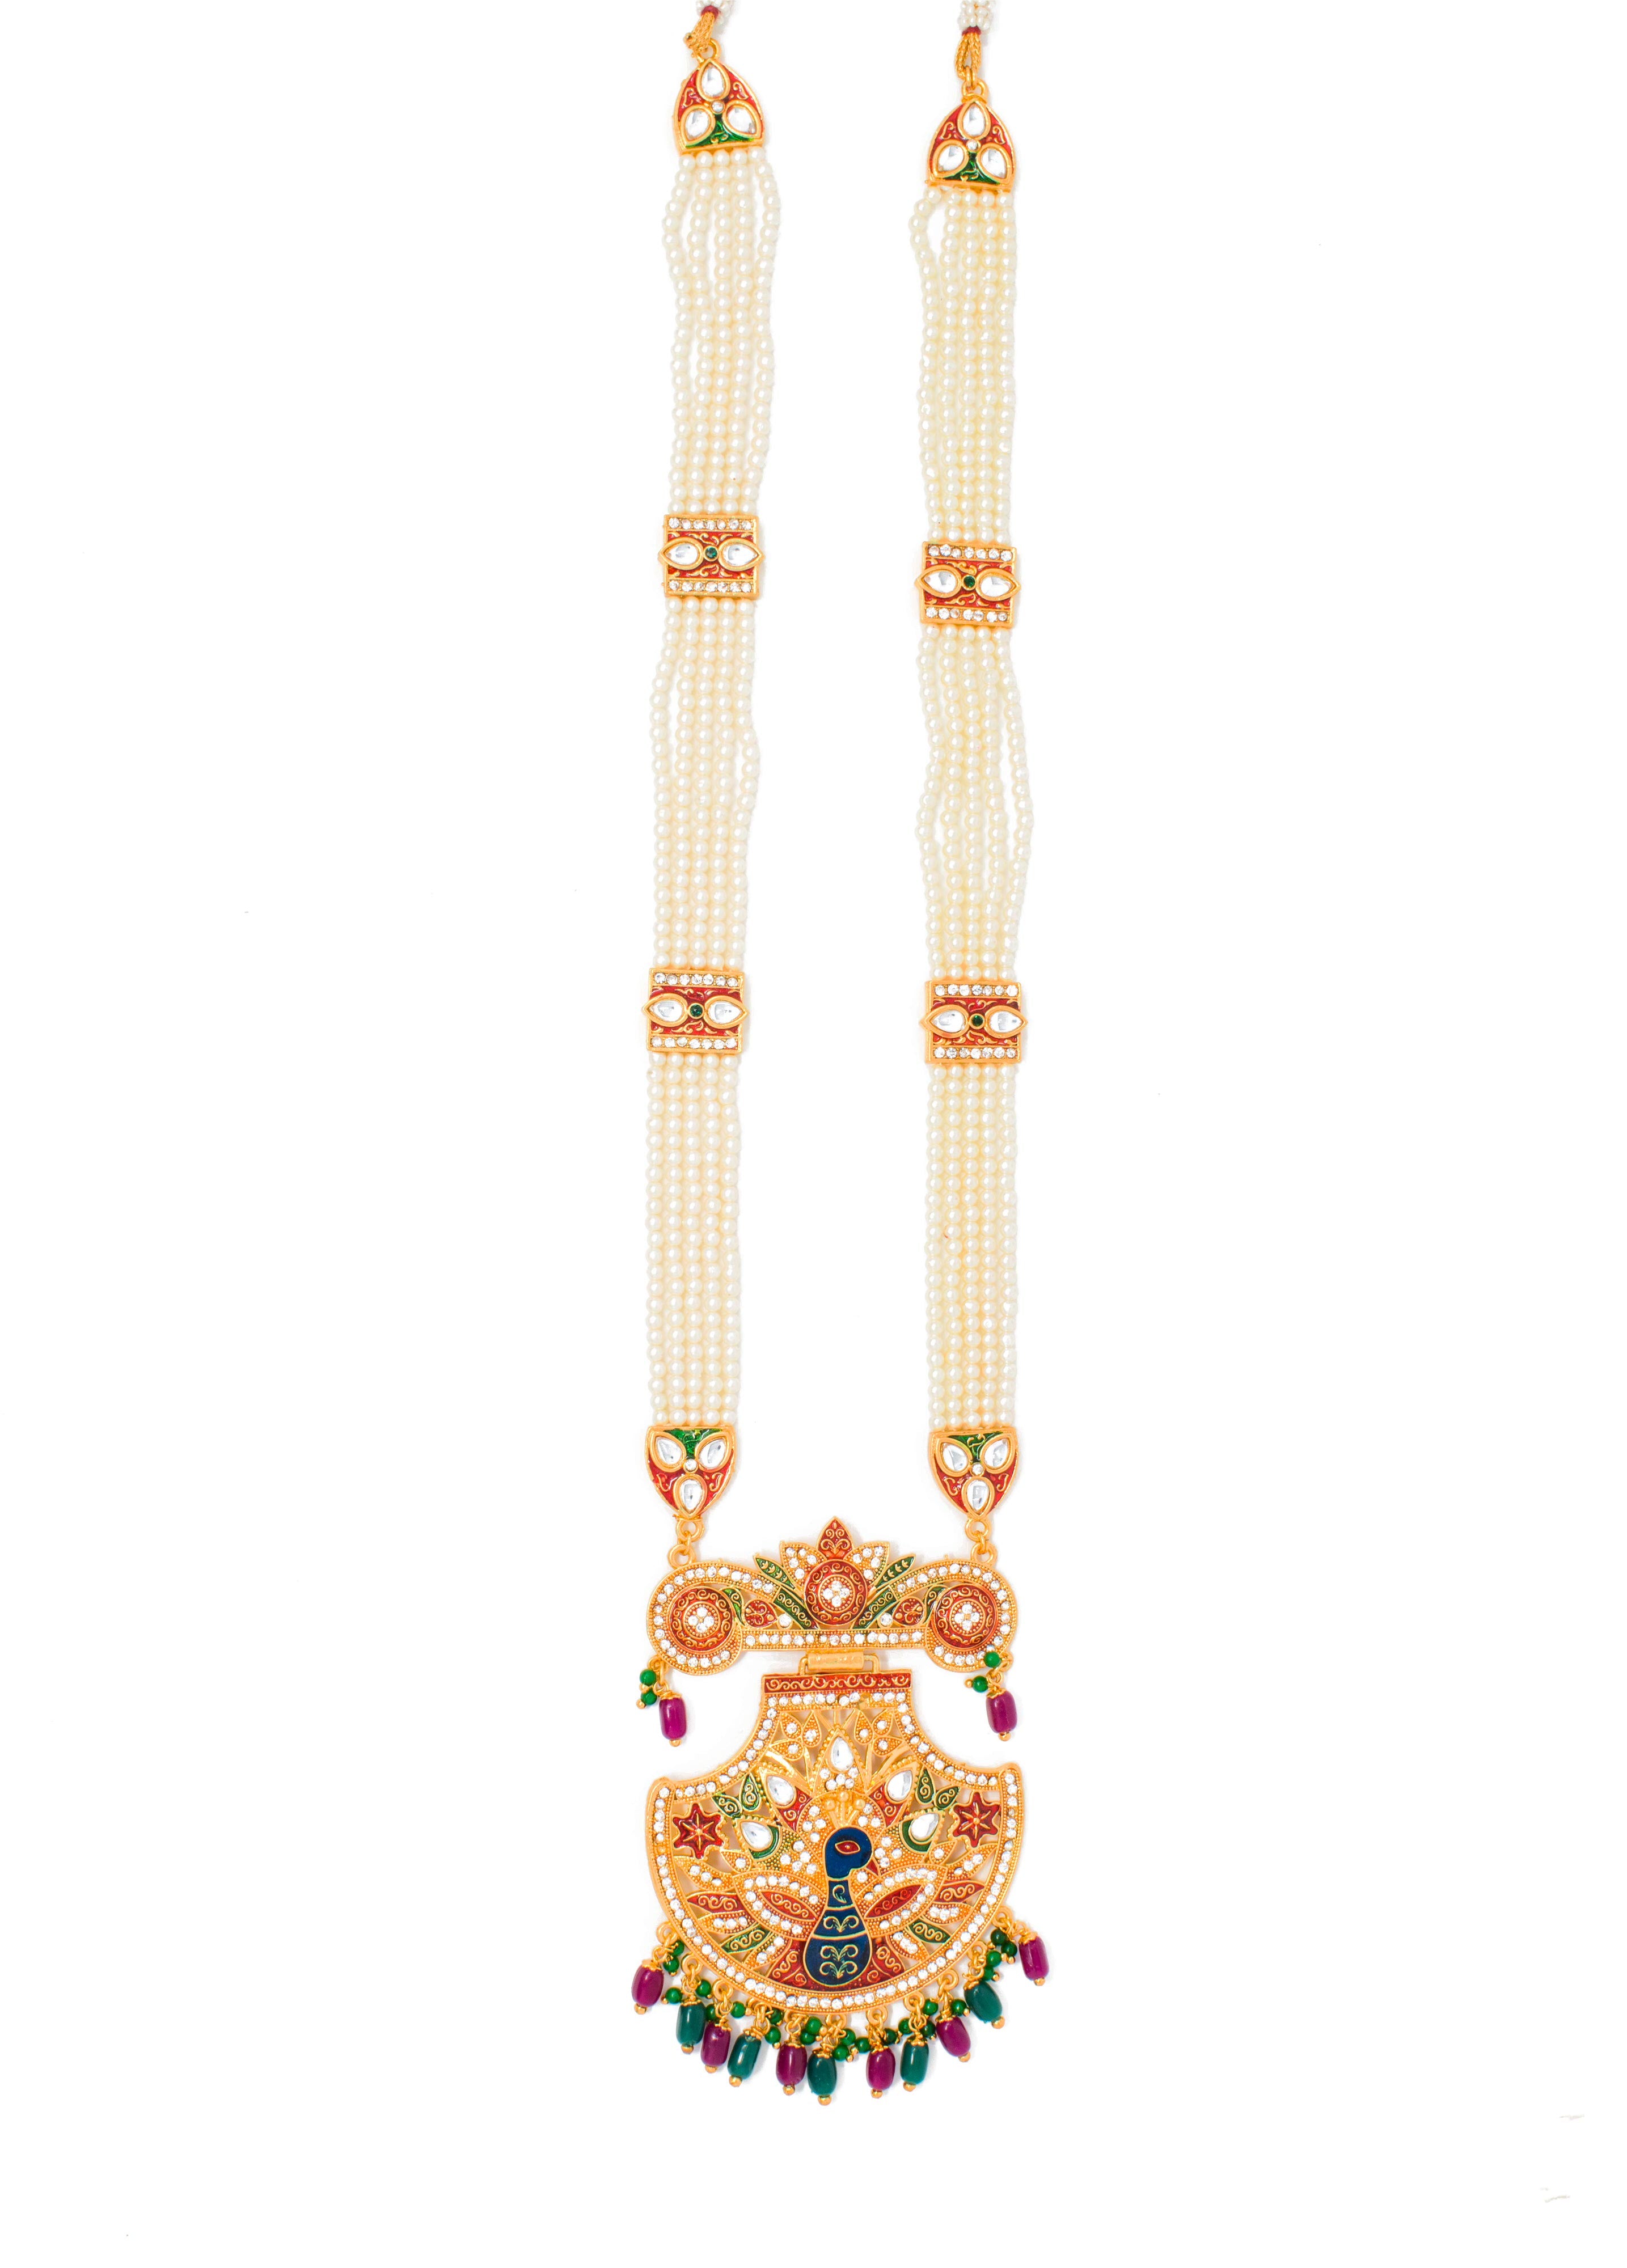 Attractive Gold Plated Meenakari and AD Work Long set with Moti Mala Chain